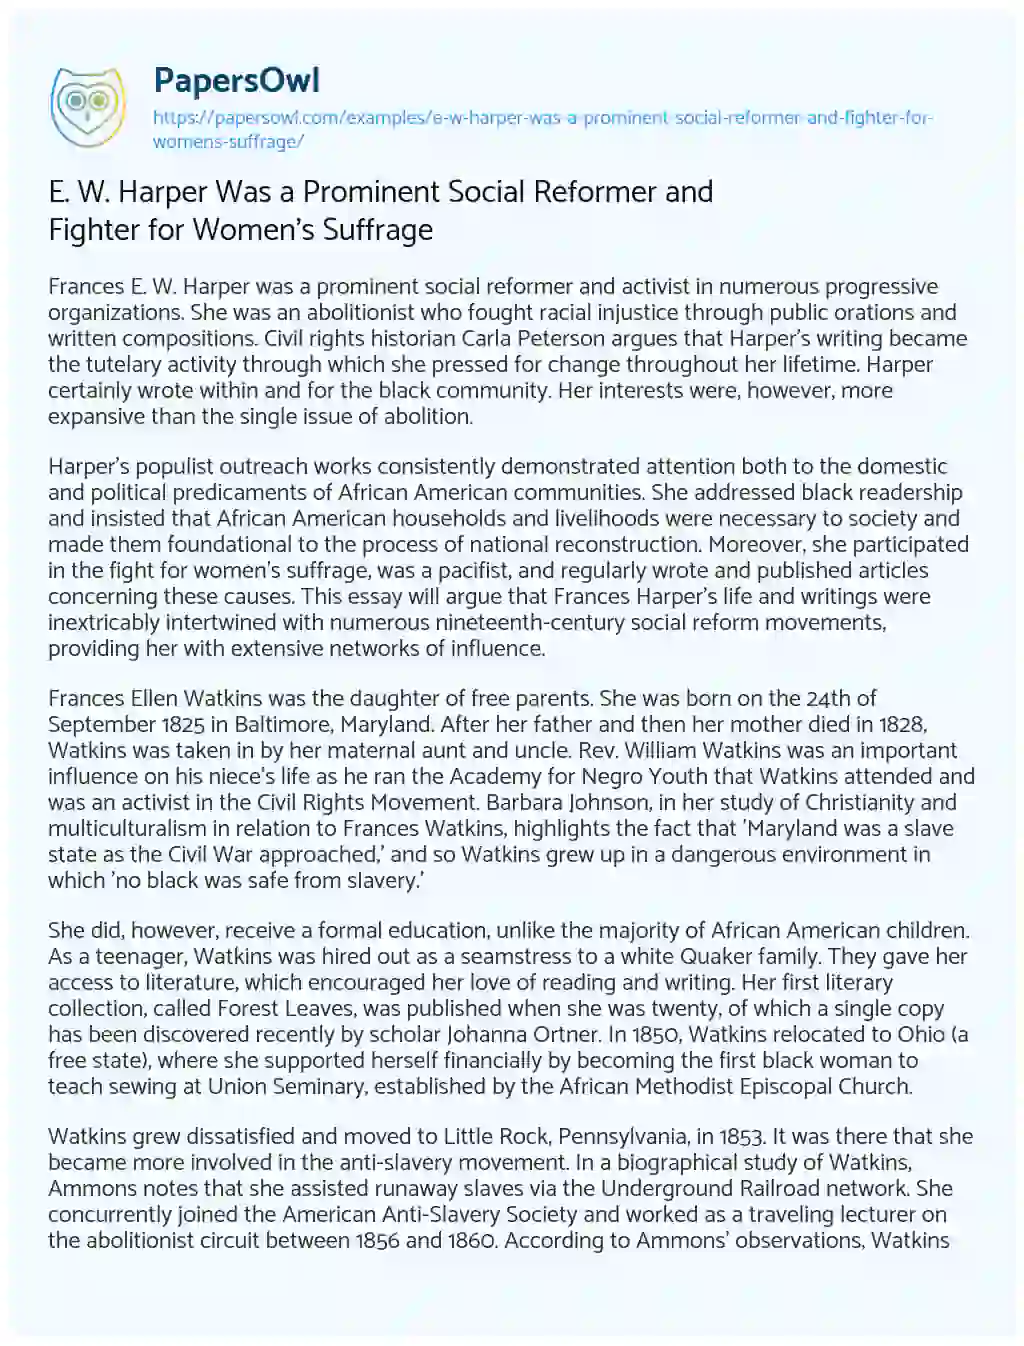 Essay on E. W. Harper was a Prominent Social Reformer and Fighter for Women’s Suffrage